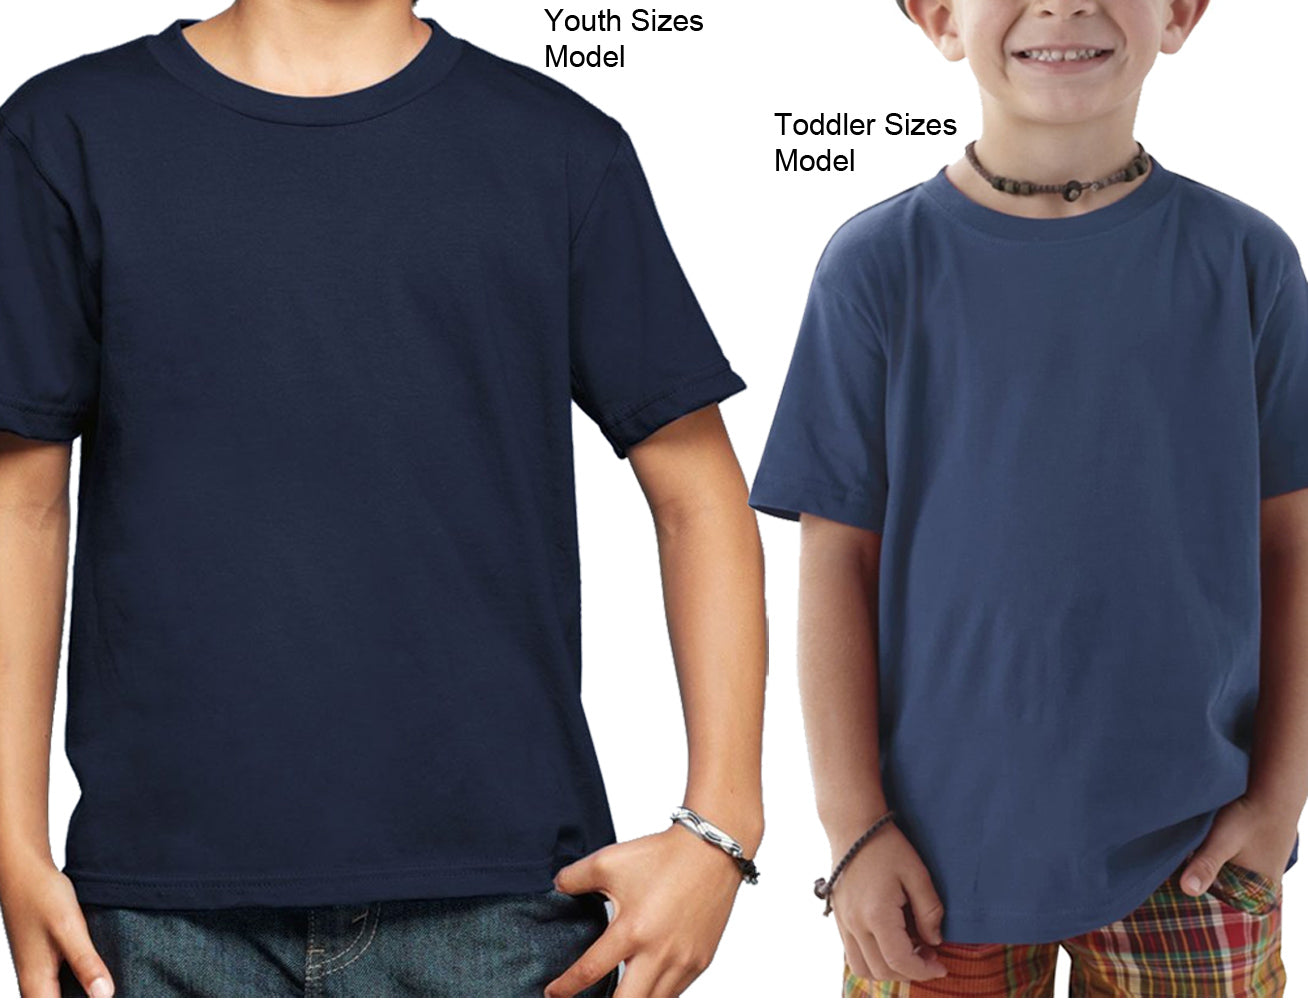 Boy's Personal Space T-Shirt